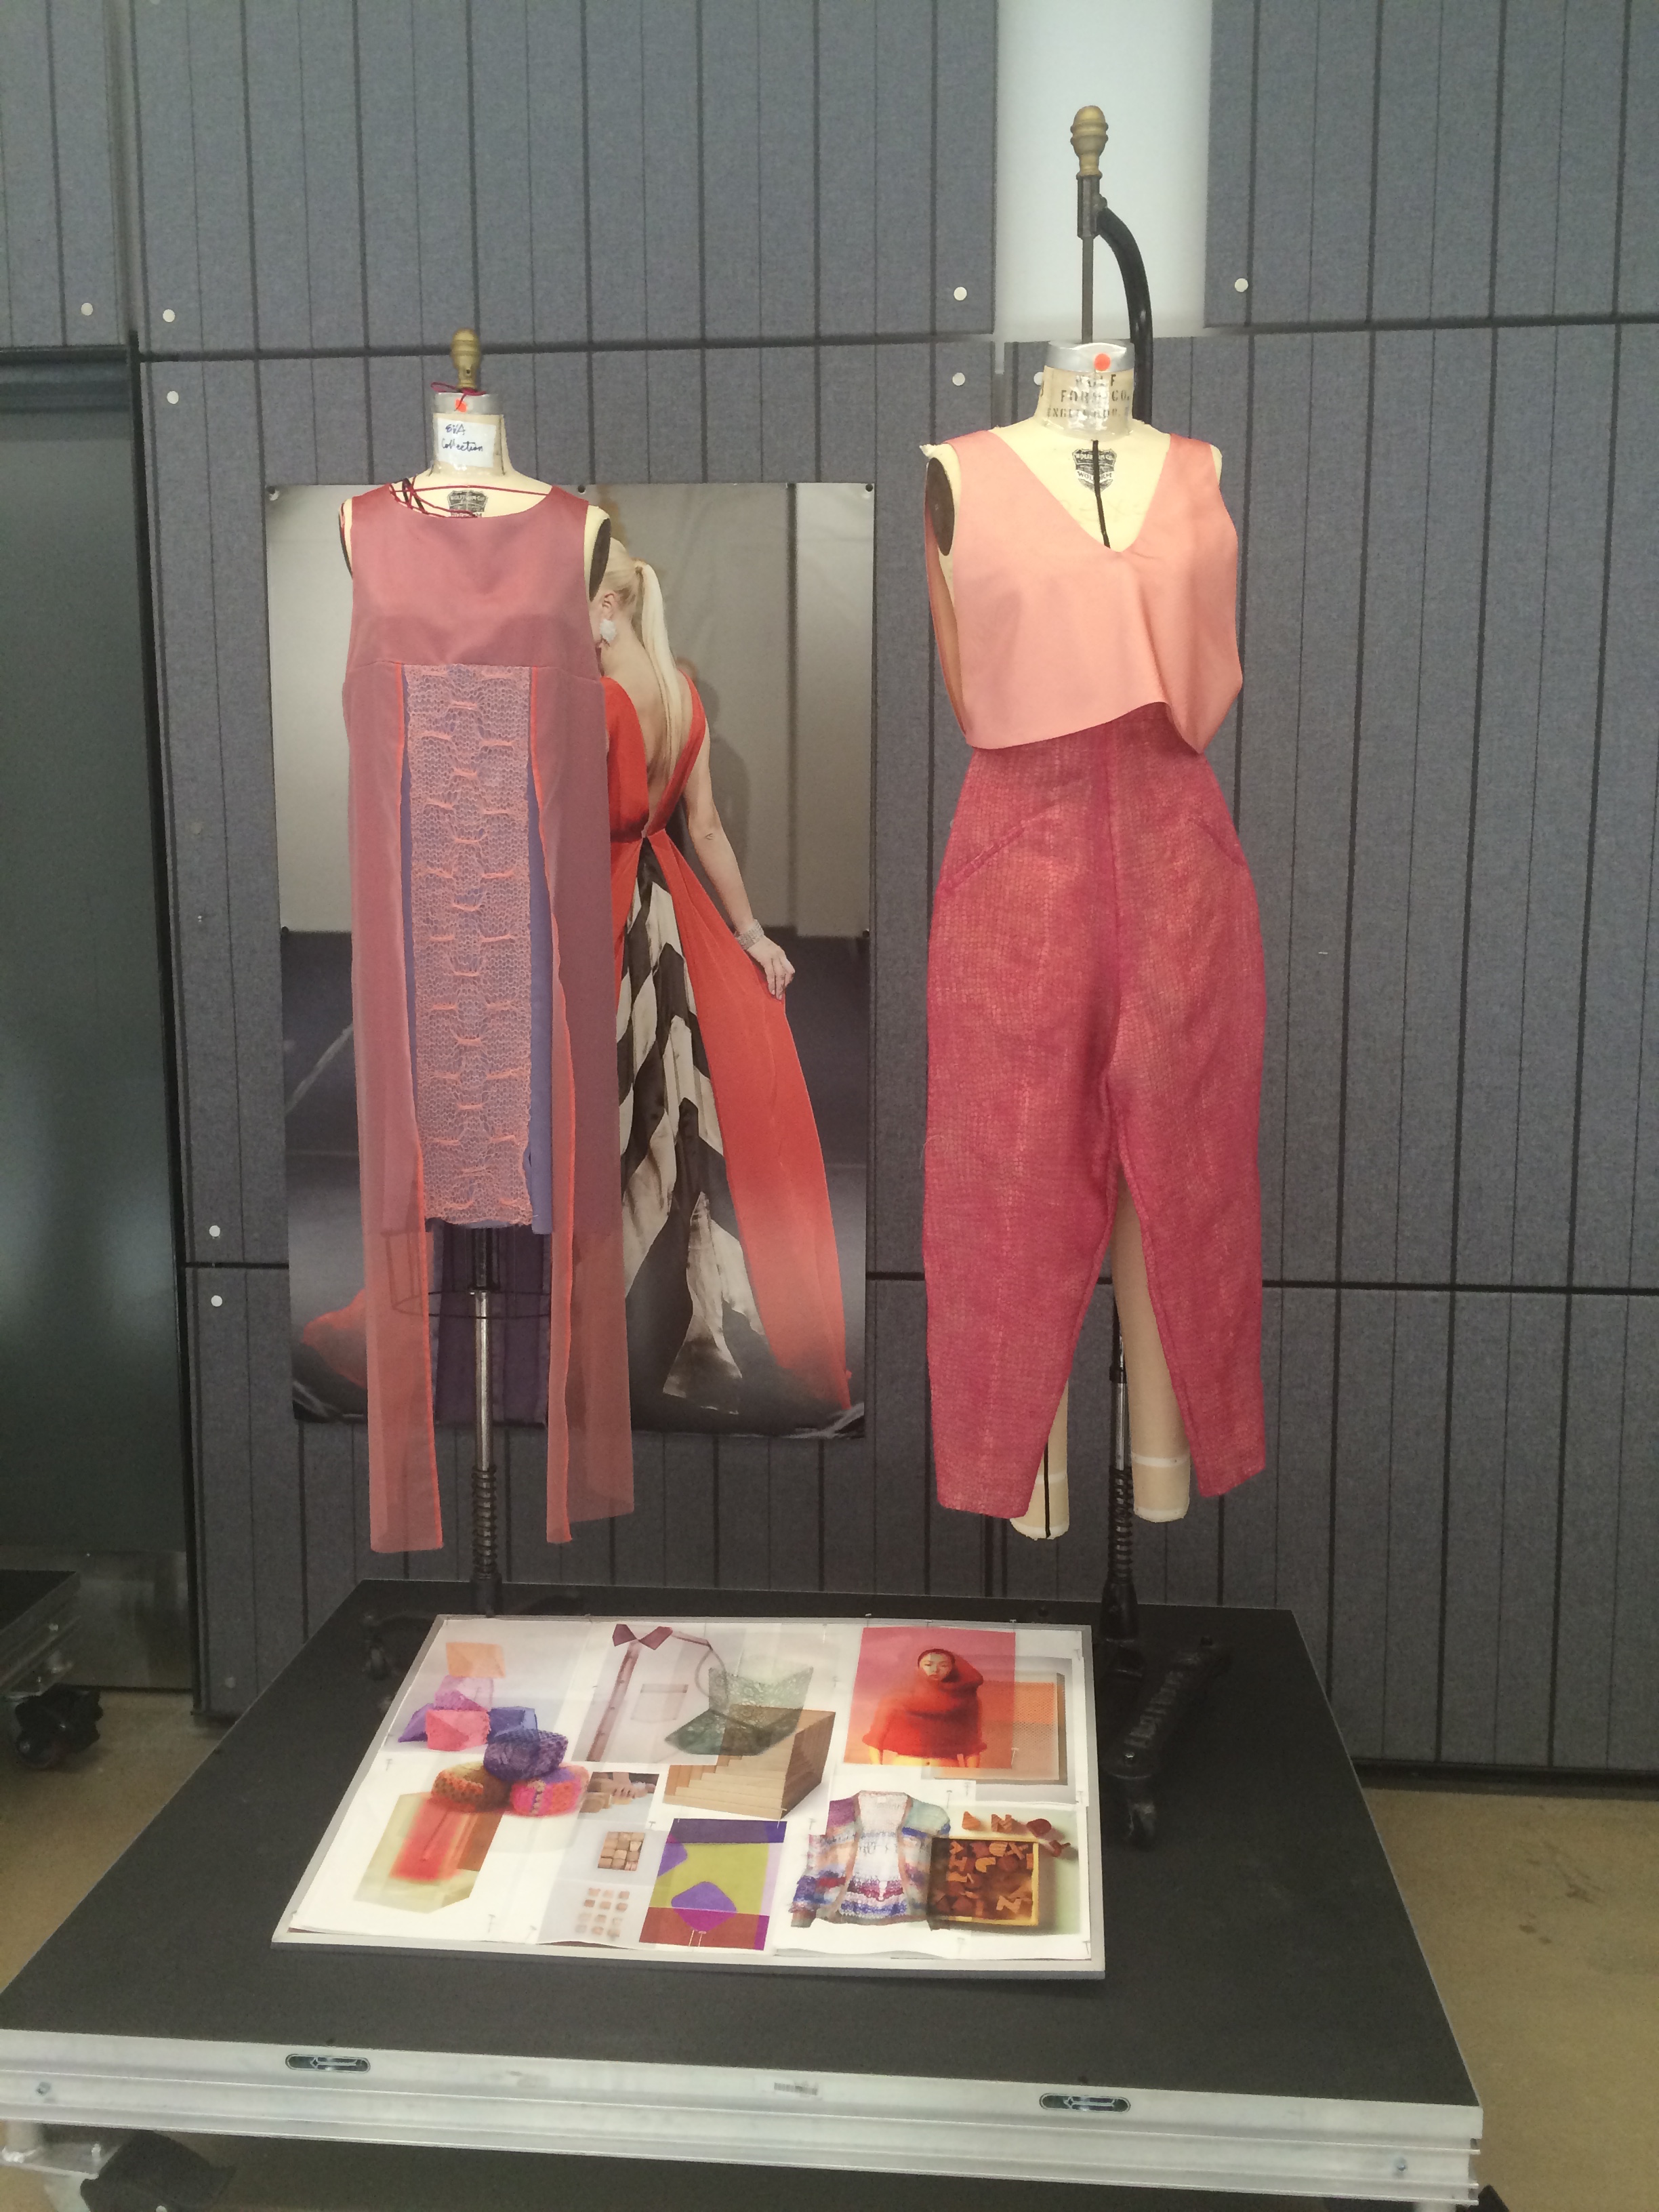 Designs from Drexel senior Ying Zhang's collection.